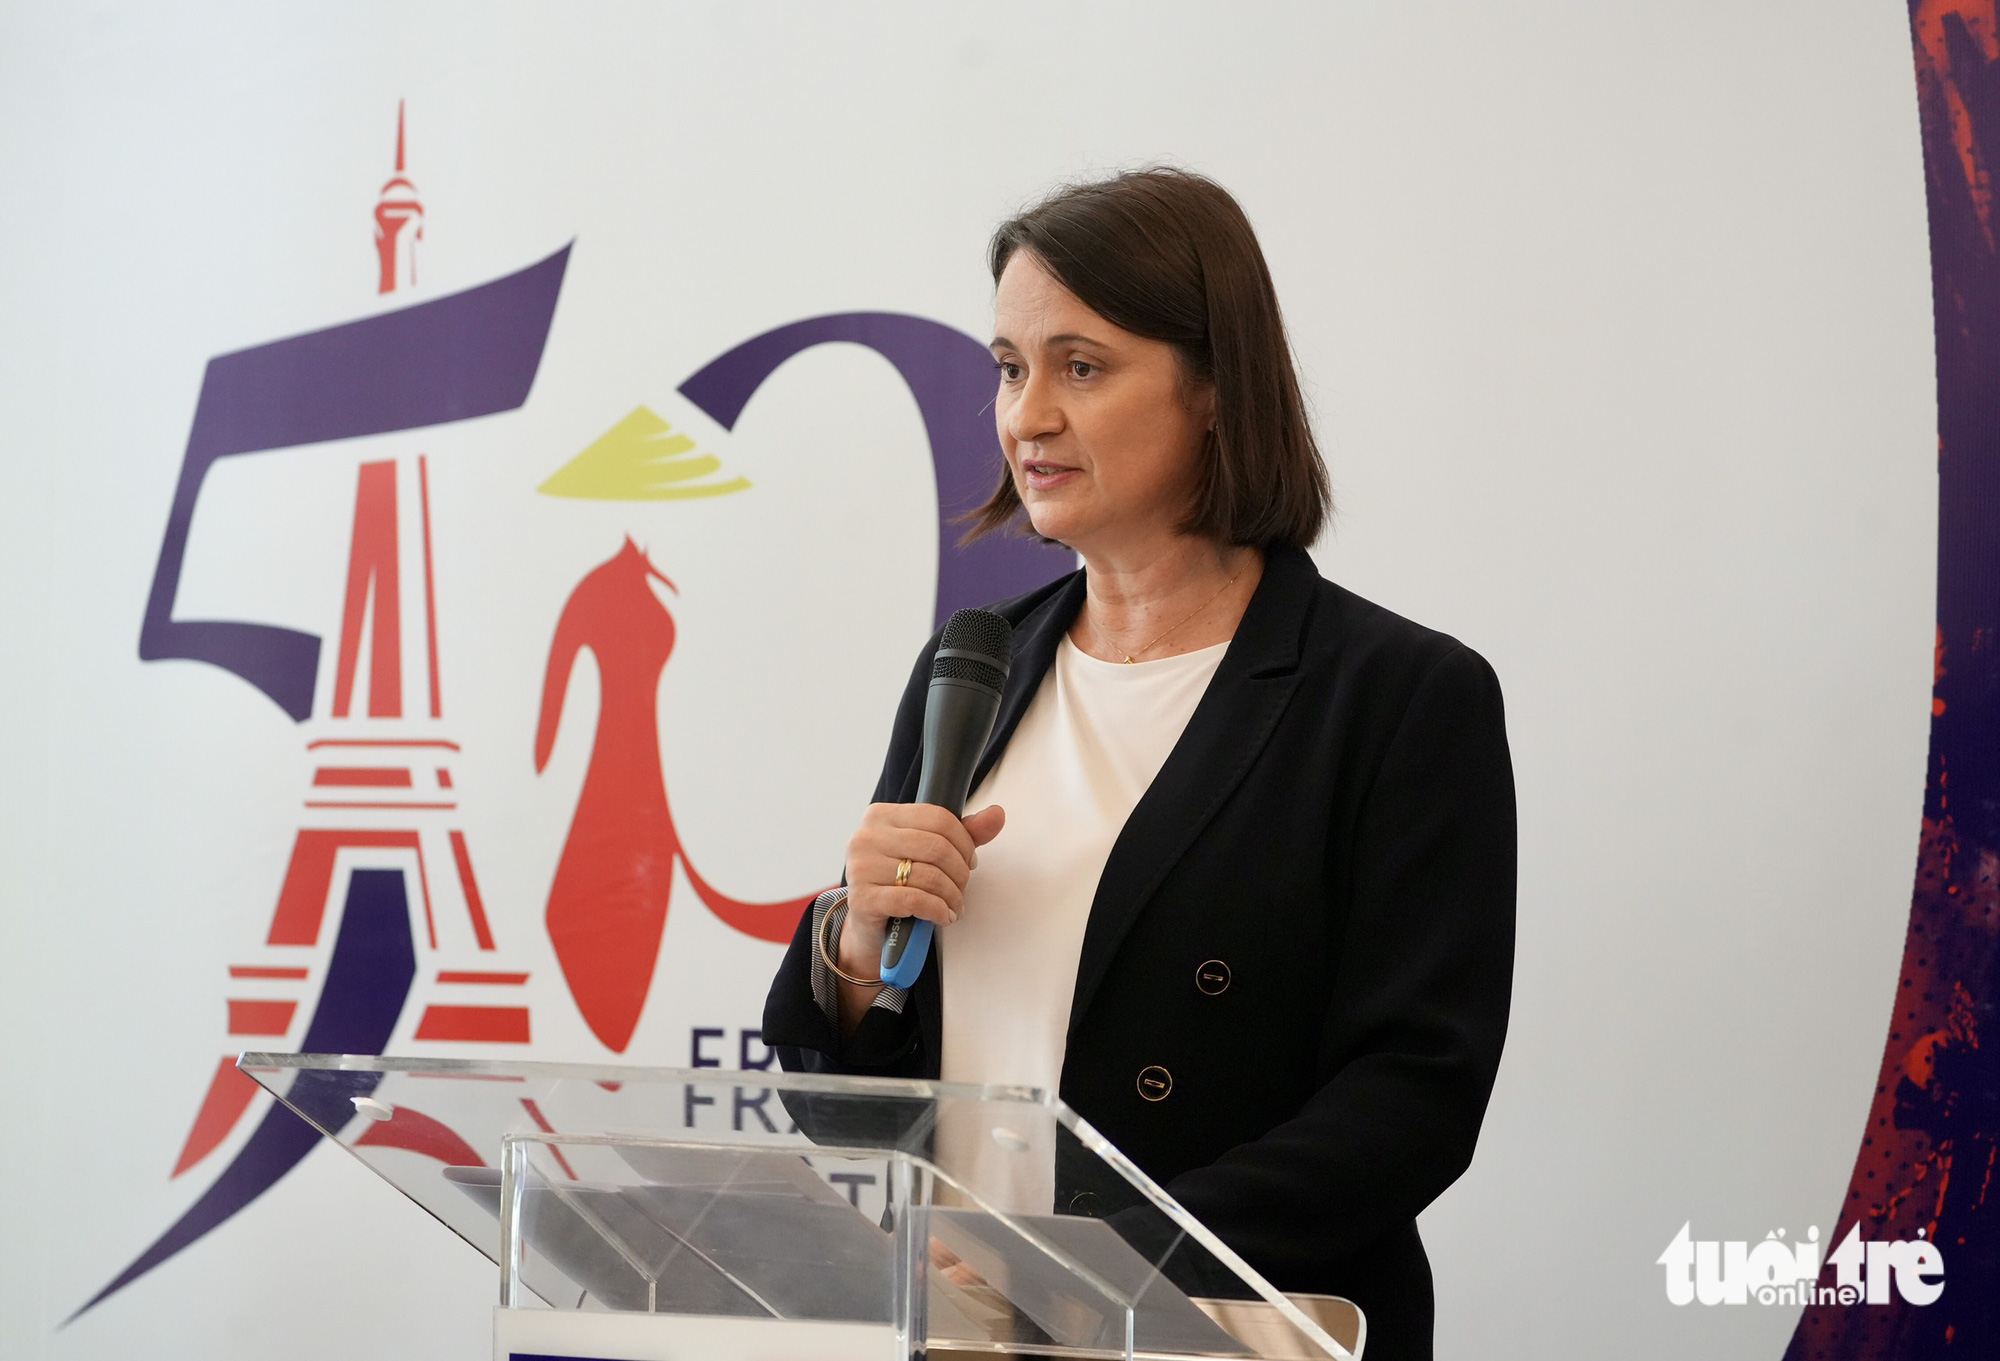 French Consul General in Ho Chi Minh City Emmanuelle Pavillon-Grosser speaks at a press briefing at the building of the French Consulate General in Ho Chi Minh City on Wednesday, March 15, 2022. Photo: Huynh Vy / Tuoi Tre